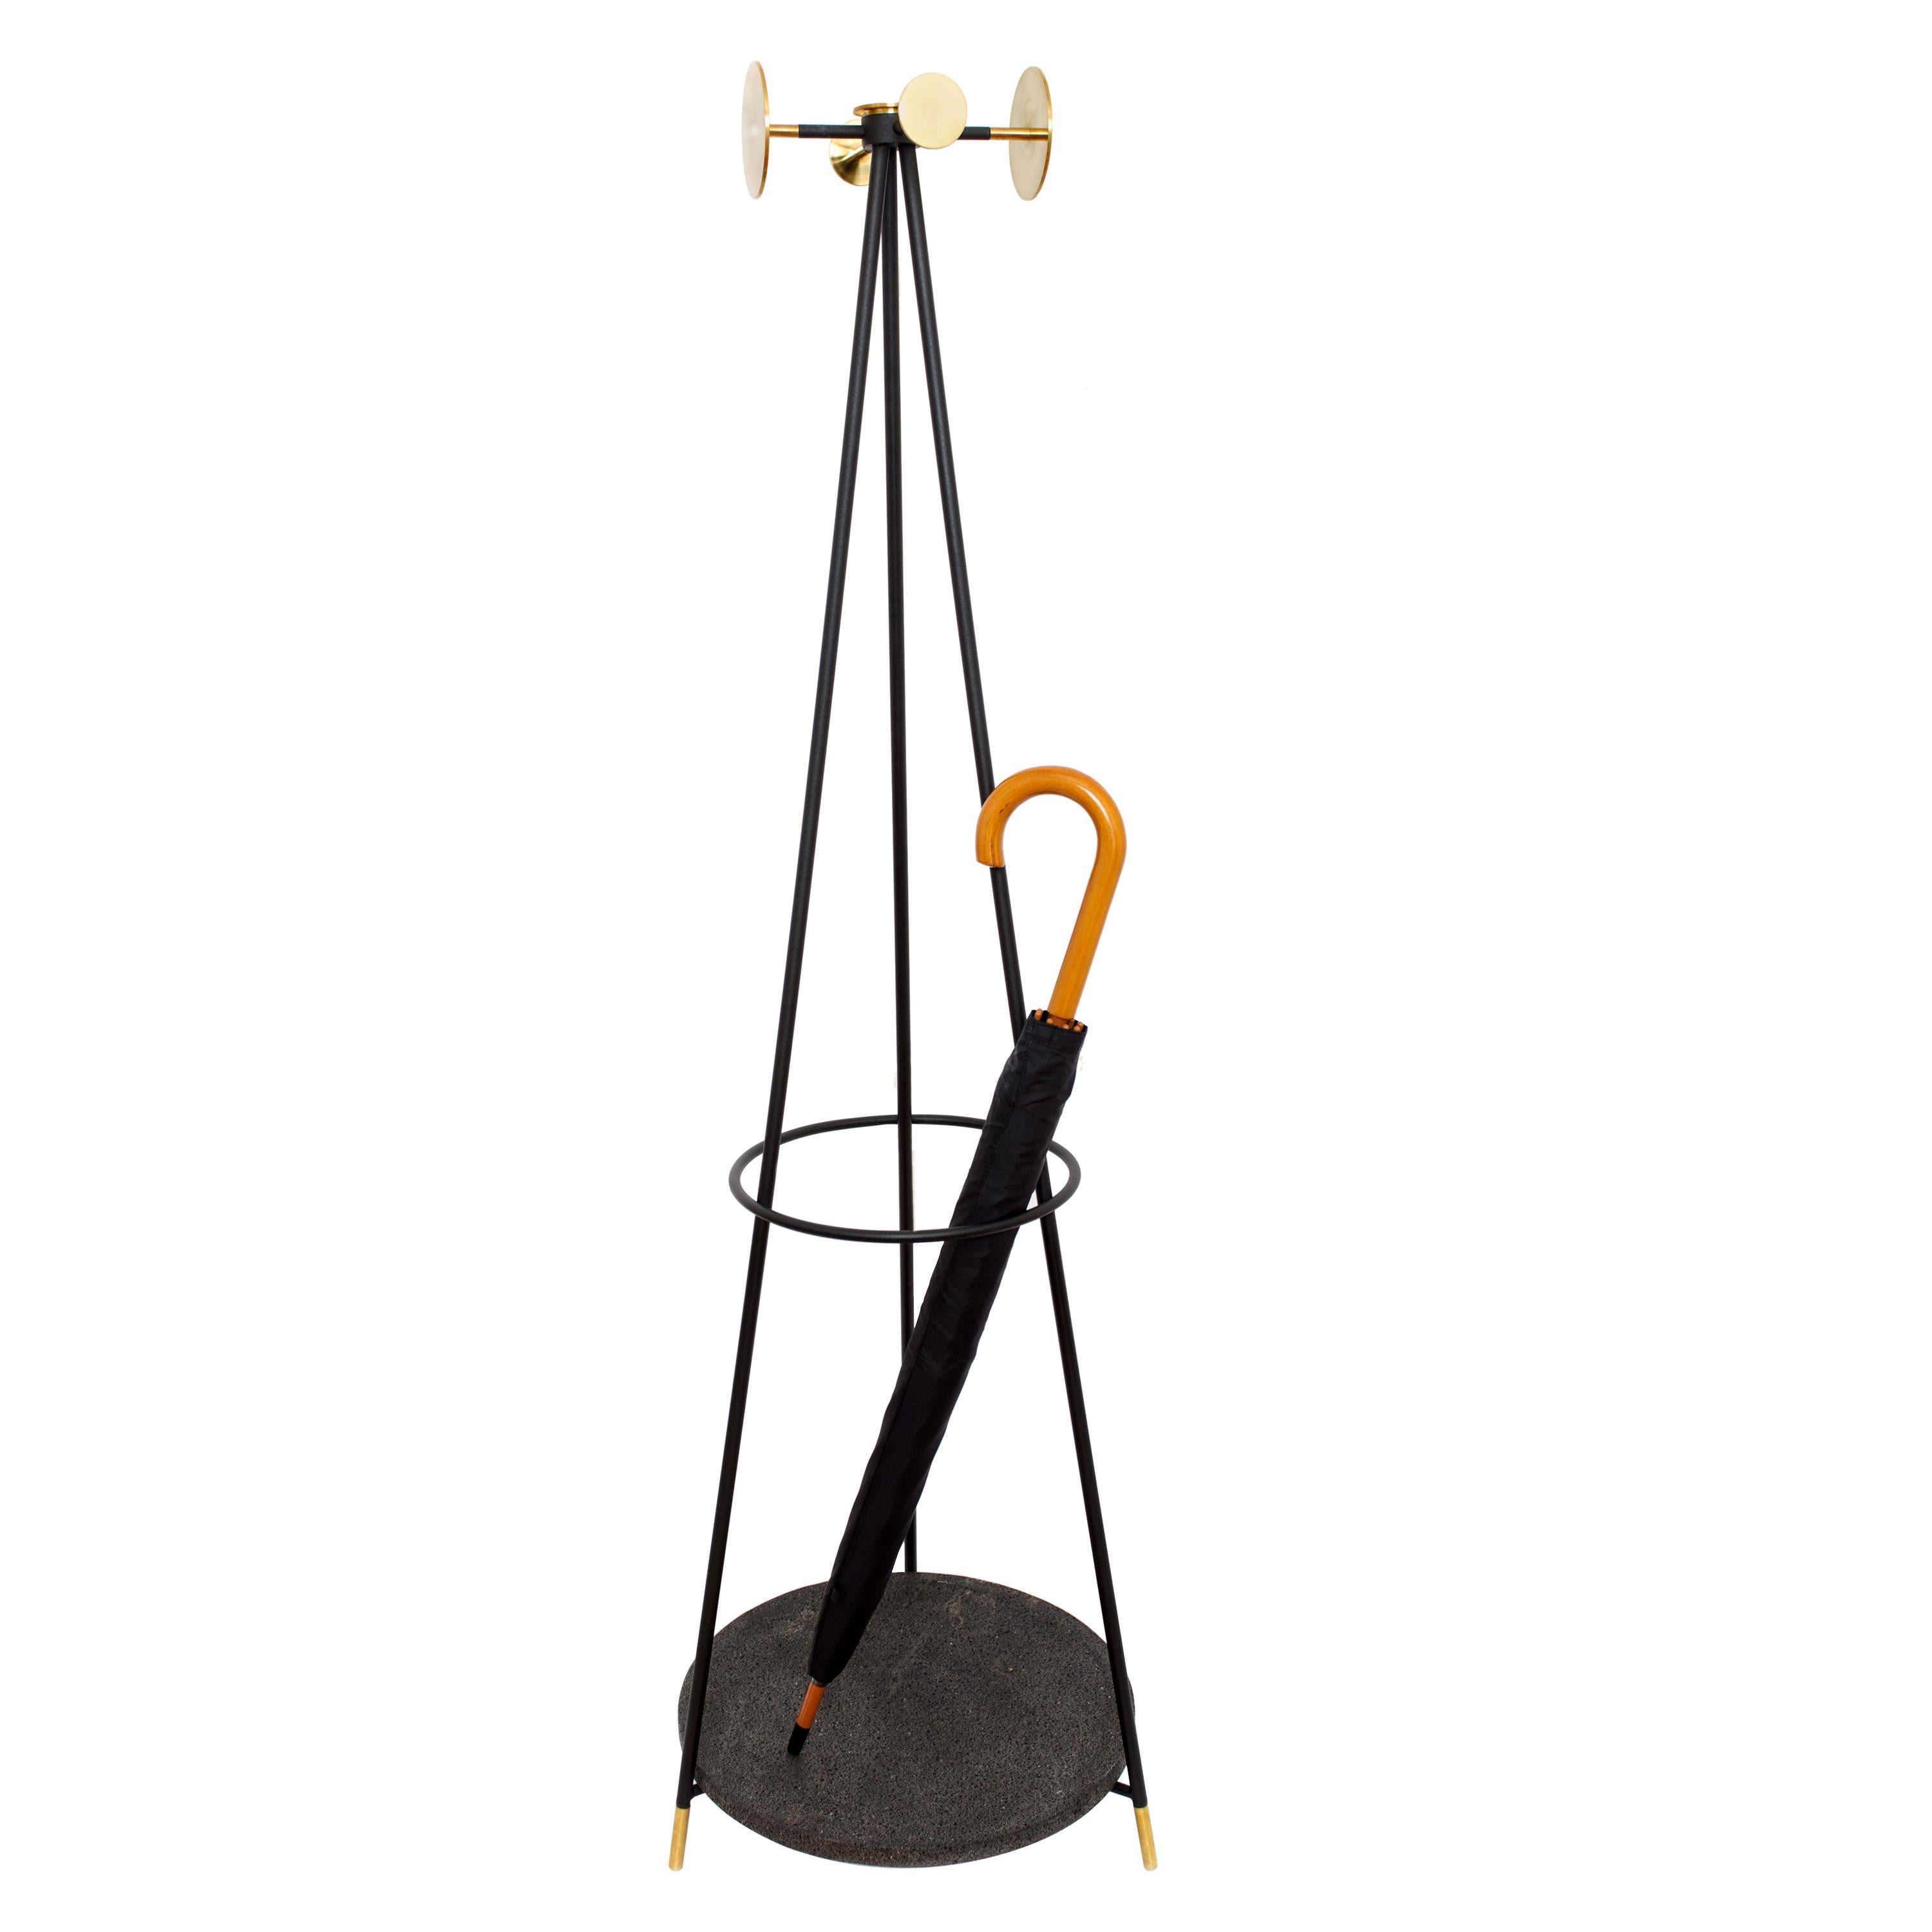 Coat and Umbrella Stand, Brass and Metal, Contemporary Mexican Design